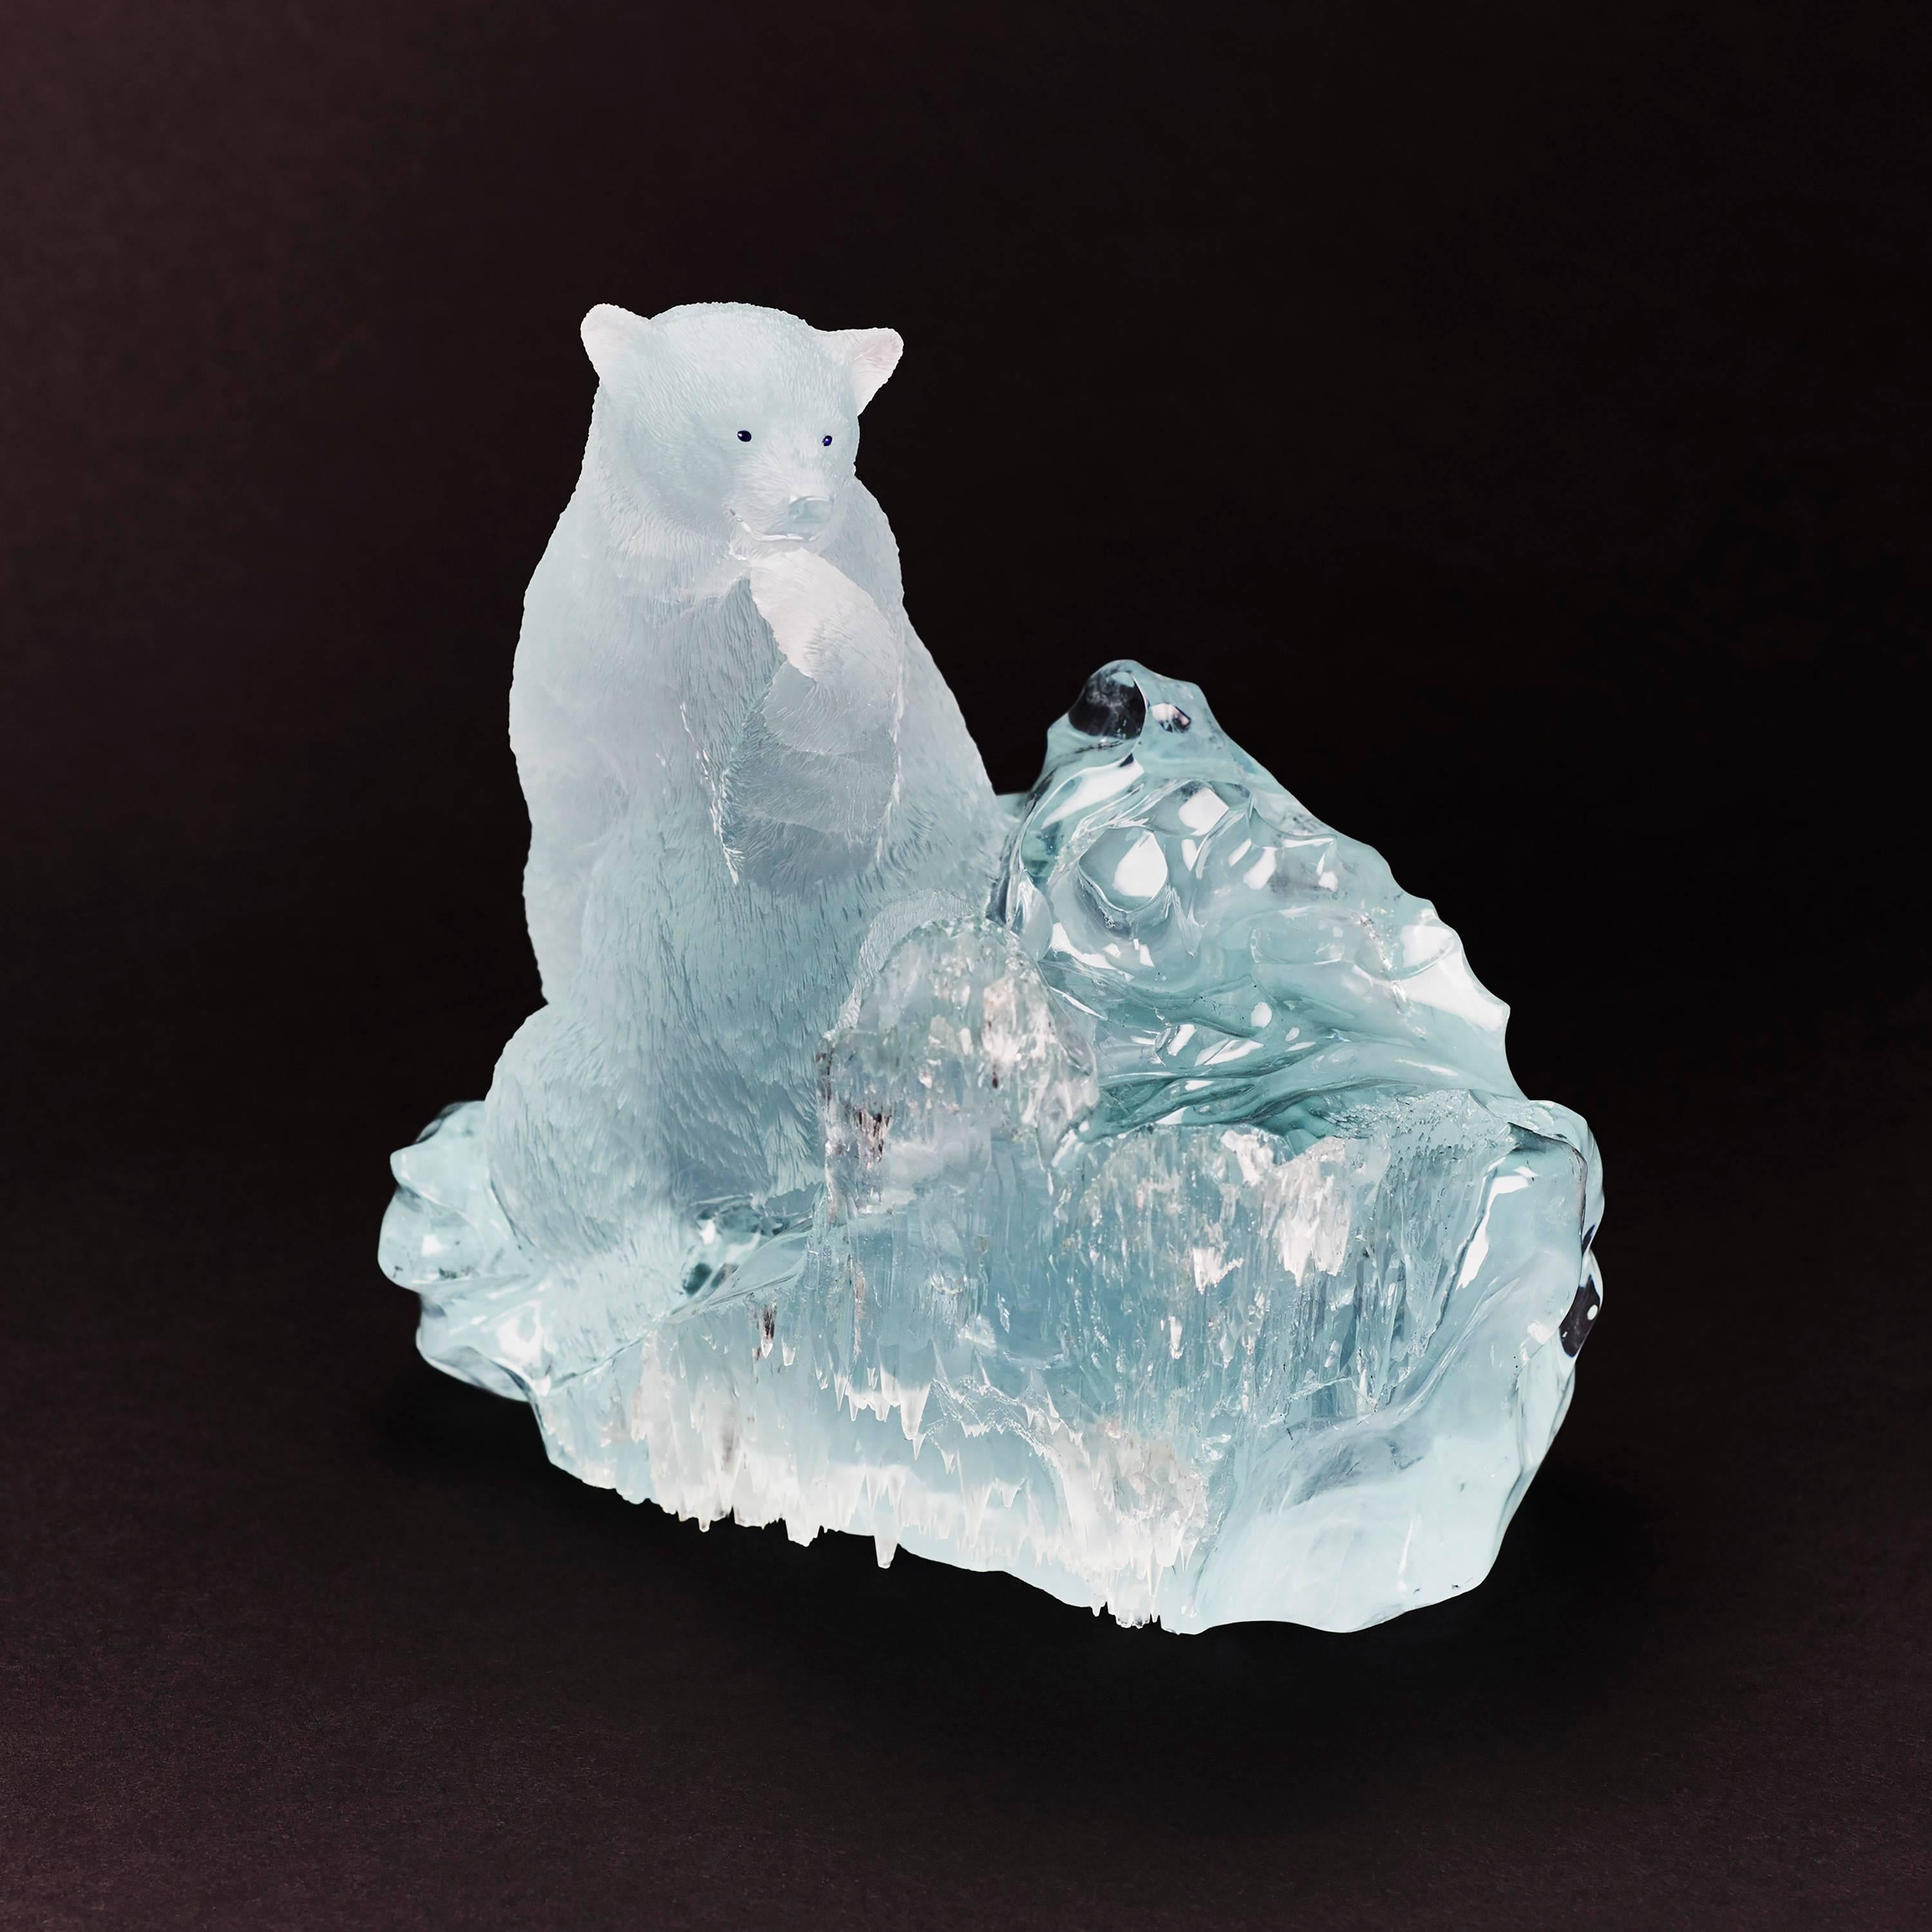 Outstanding carving of a polar bear in aquamarine.
The rough crystal has been partly untouched, showing the natural crystallization of the aquamarine
and the bear has been carved within the same crystal. Base and polar bear are not attached.
The